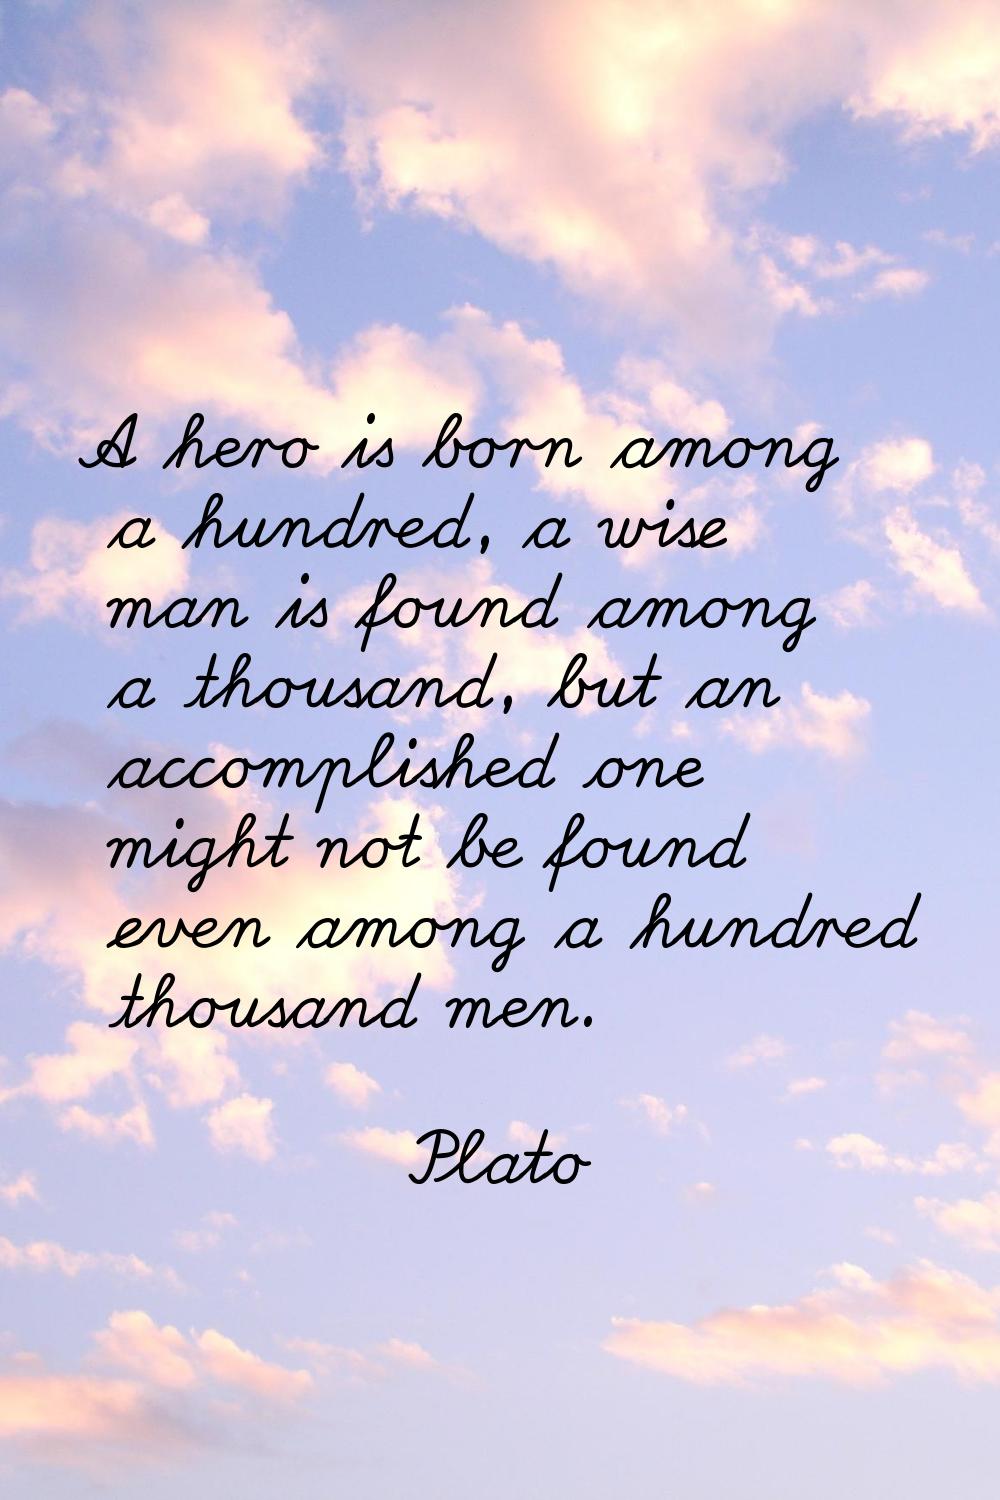 A hero is born among a hundred, a wise man is found among a thousand, but an accomplished one might